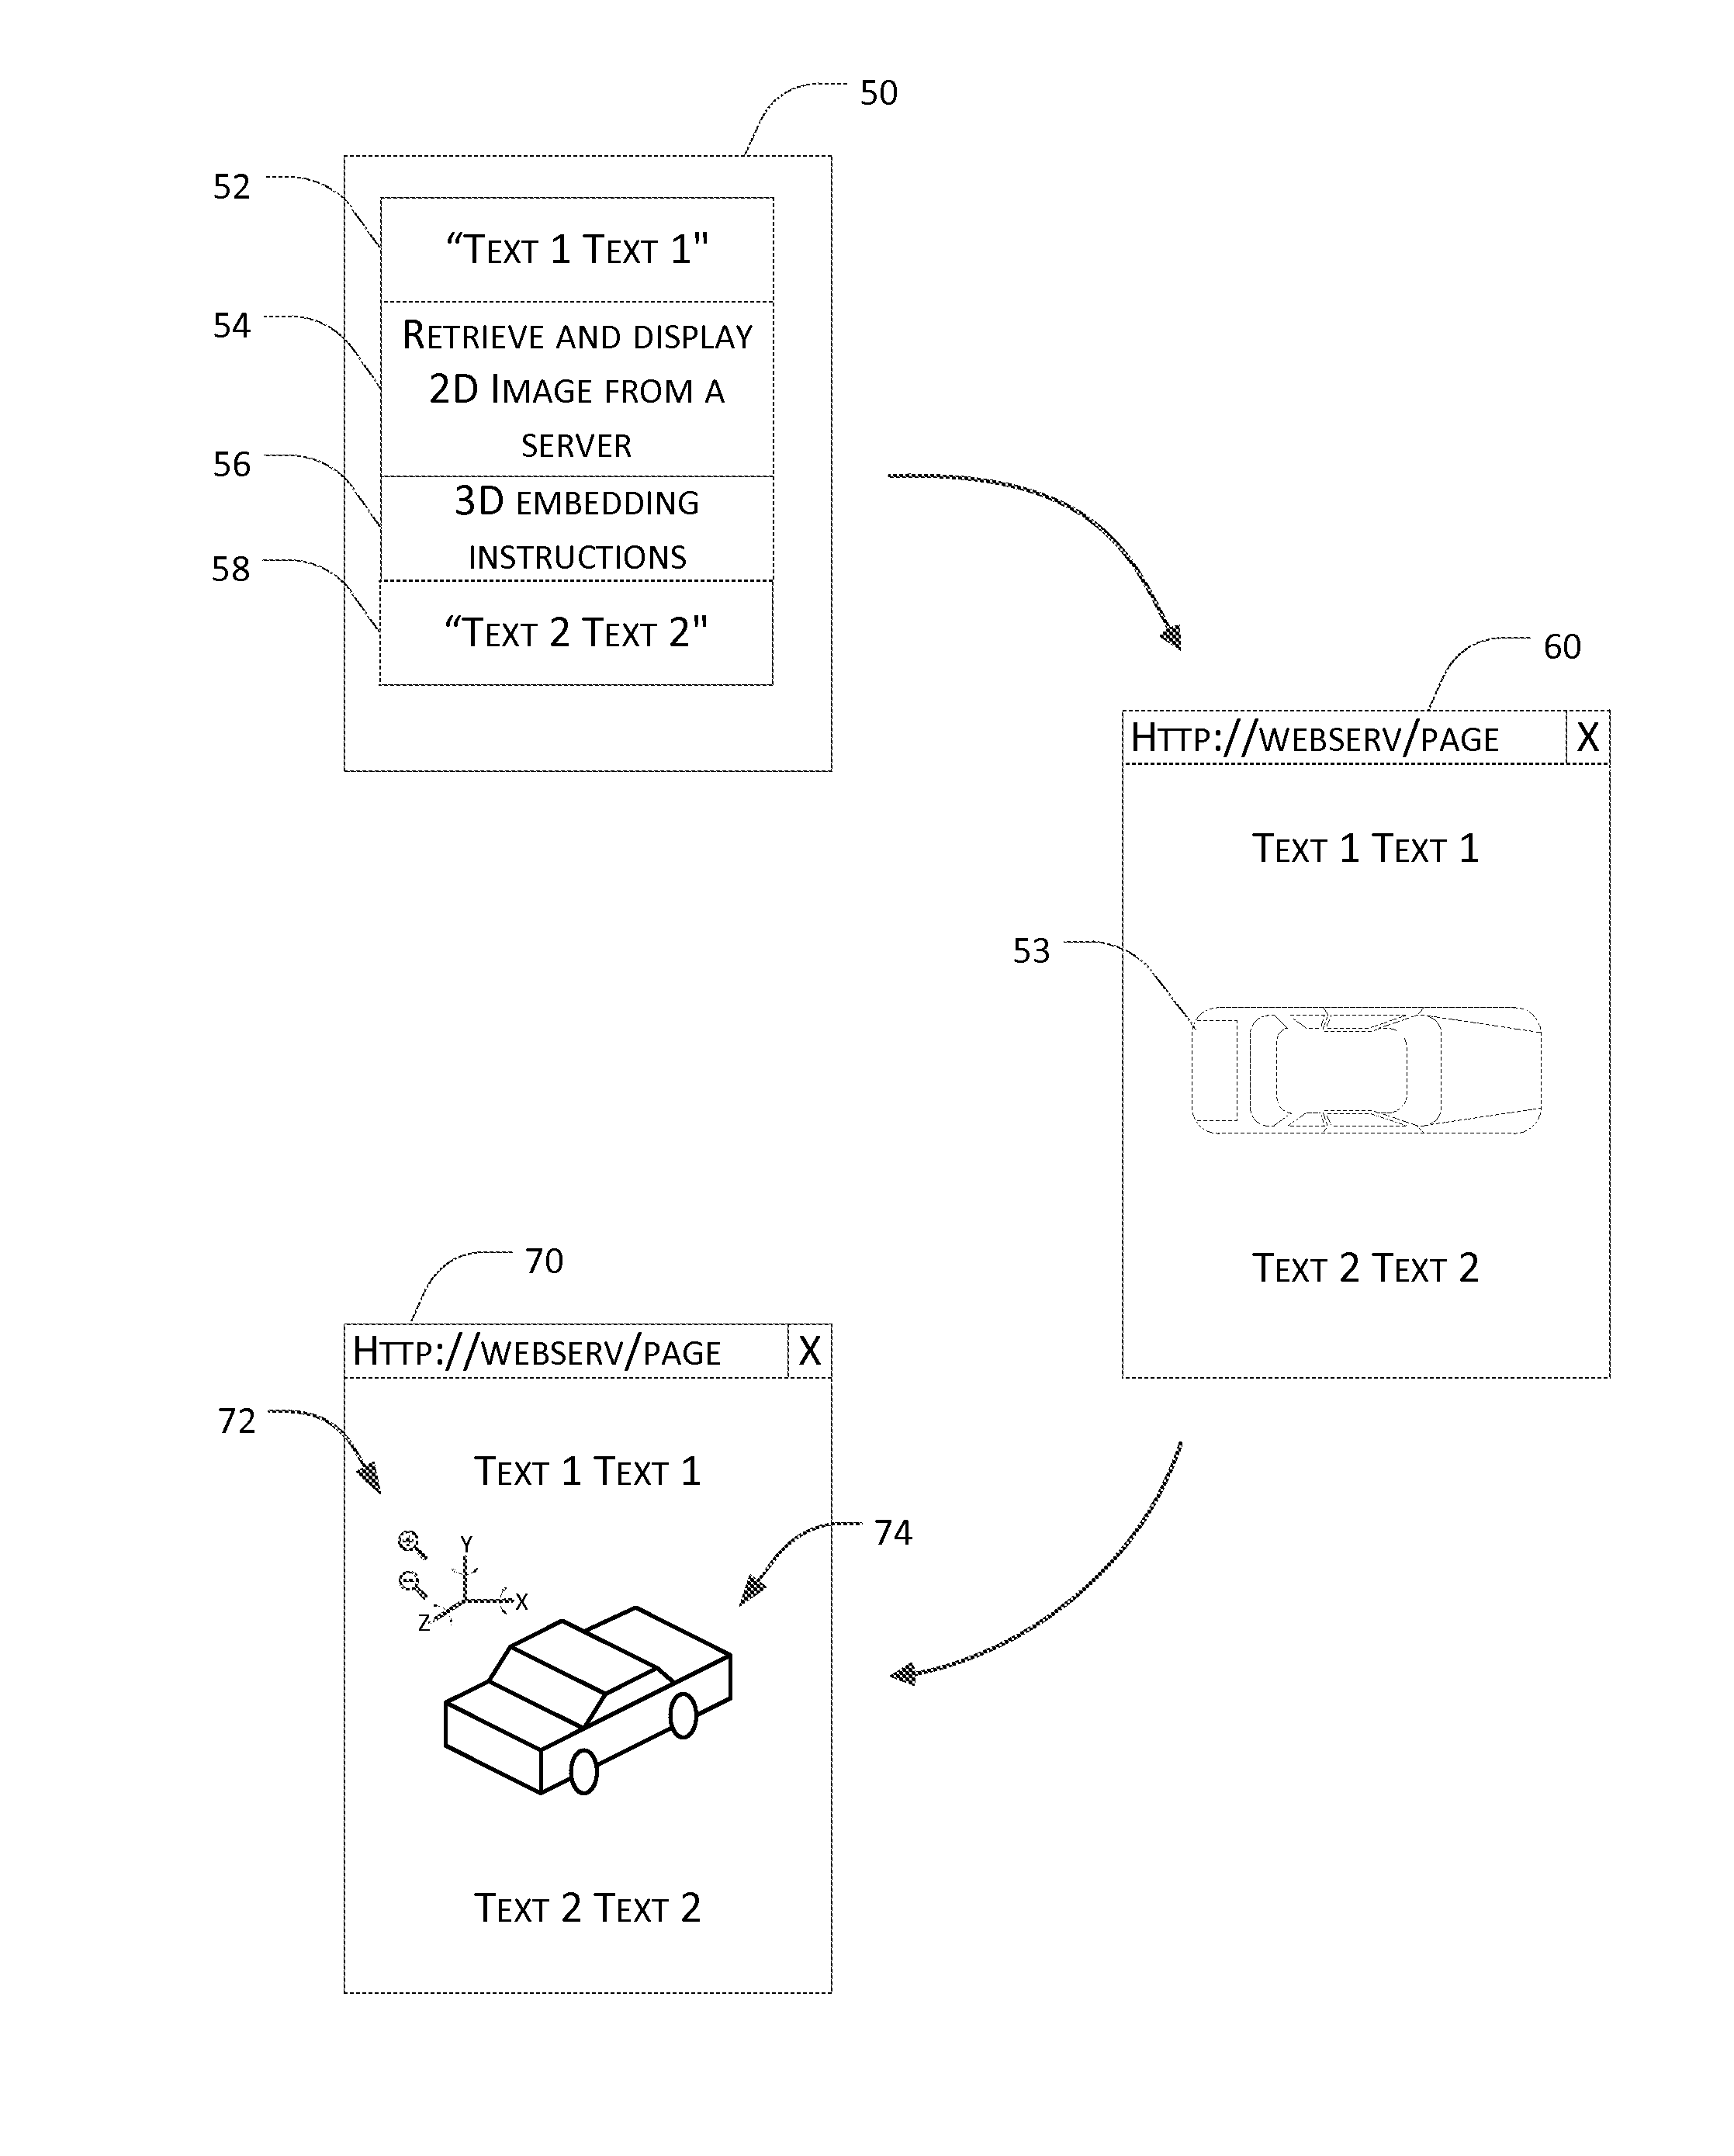 Systems and methods for transmitting and rendering 3D visualizations over a network